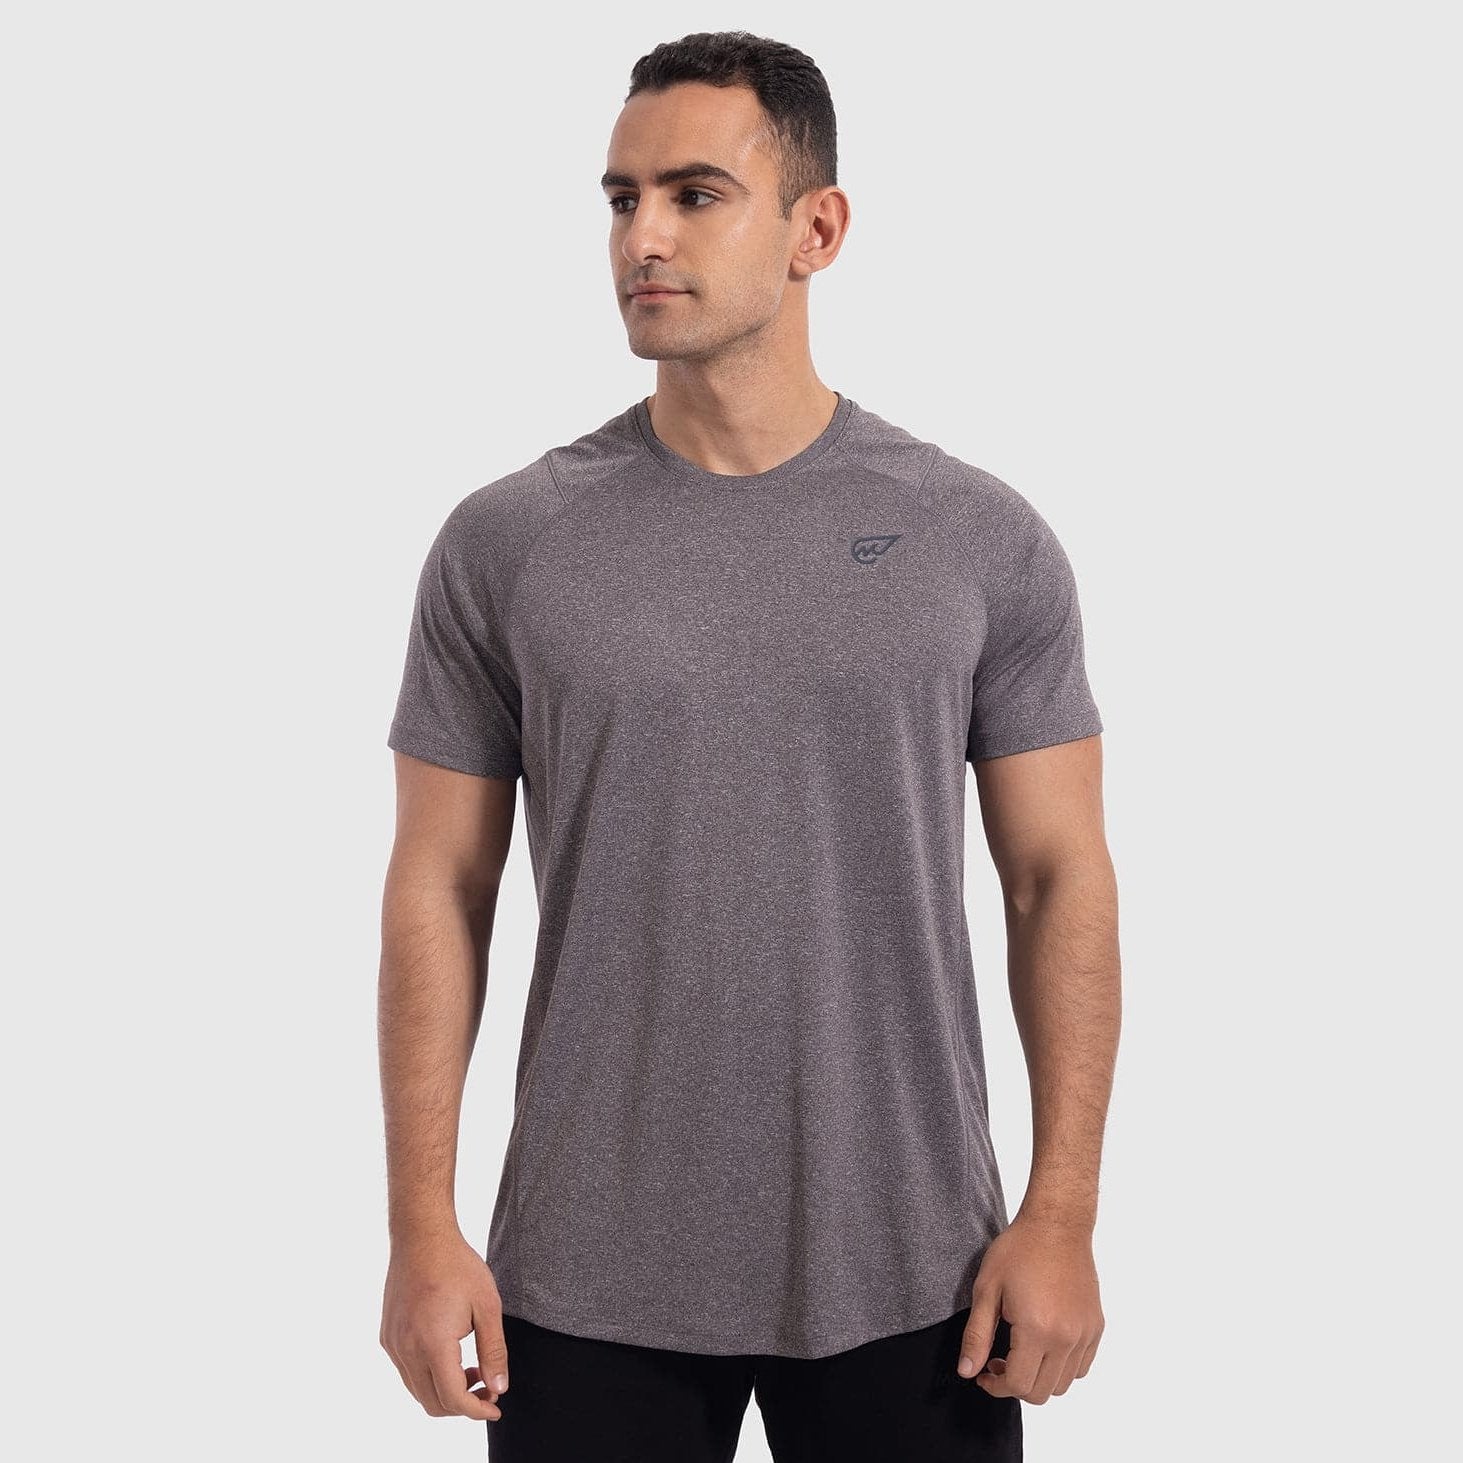 Muscle Fit Training T-shirt in Grey - Sporty Pro